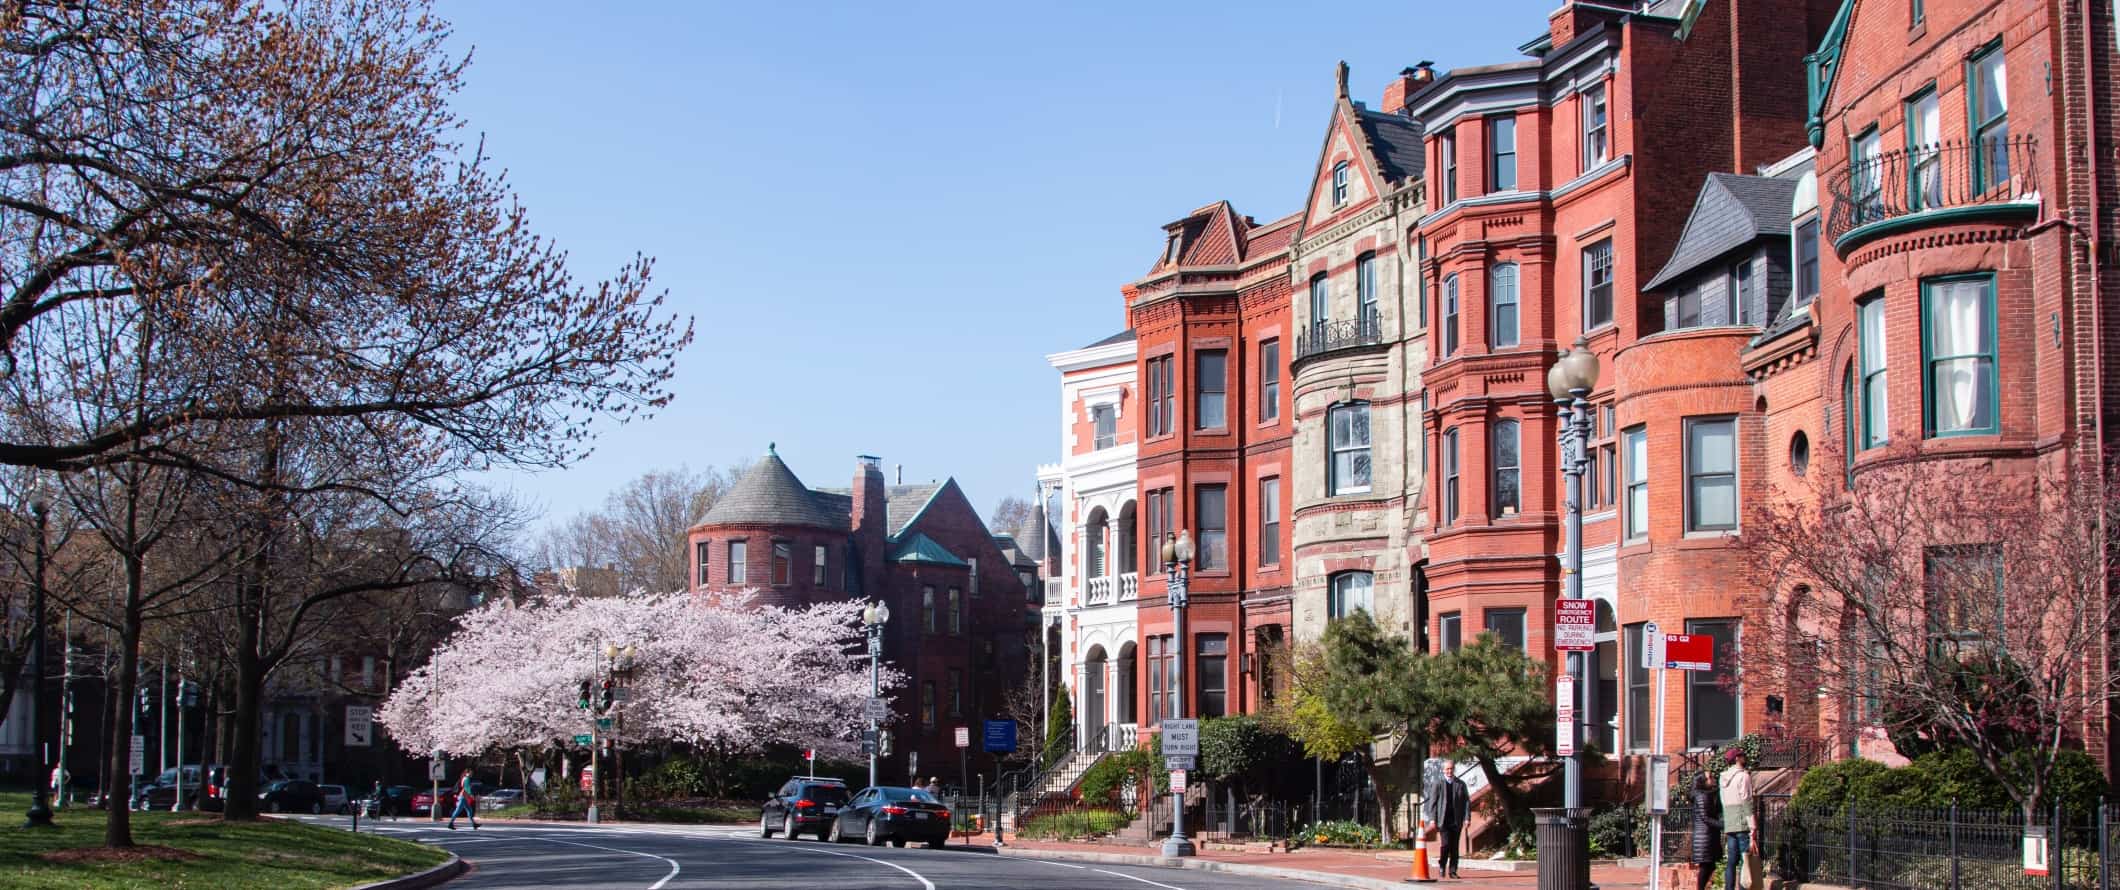 Historic red brick buildings and cherry blossoms in bloom in Washington, DC.